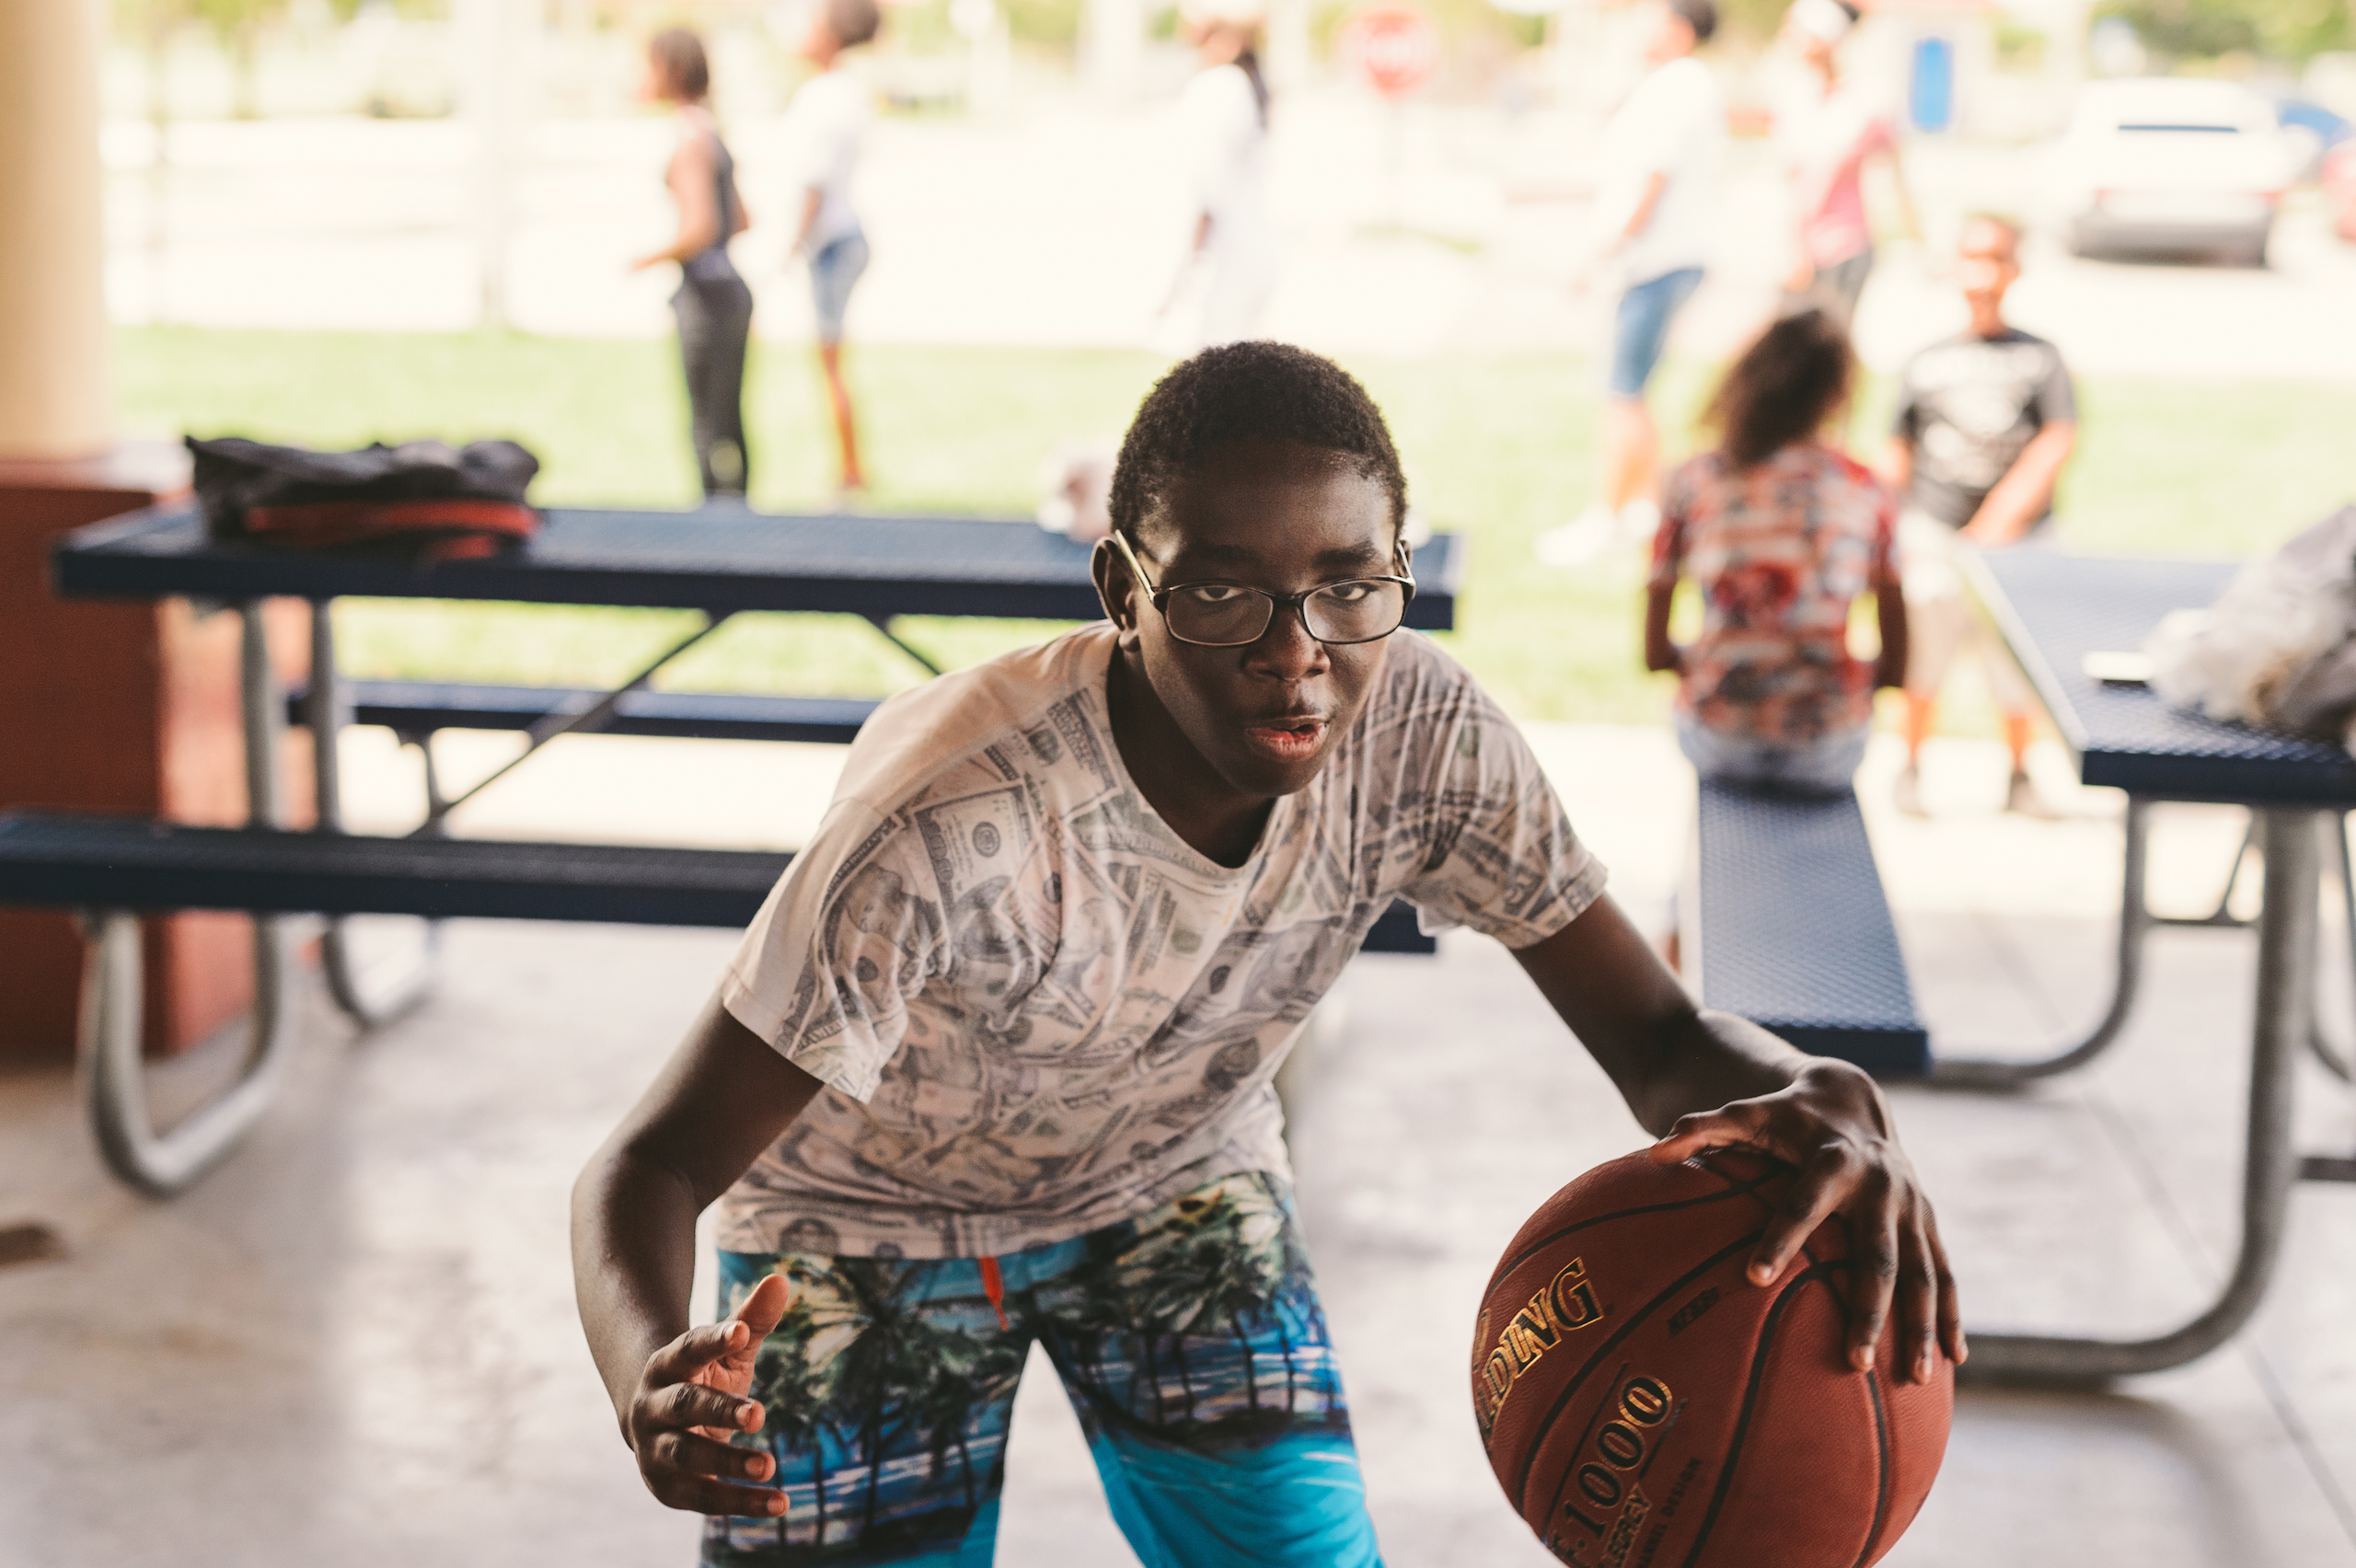 KES African American young adult wearing bermuda shorts and t shirt with money graphics on it posing for the camera with a basketball in a pavilion